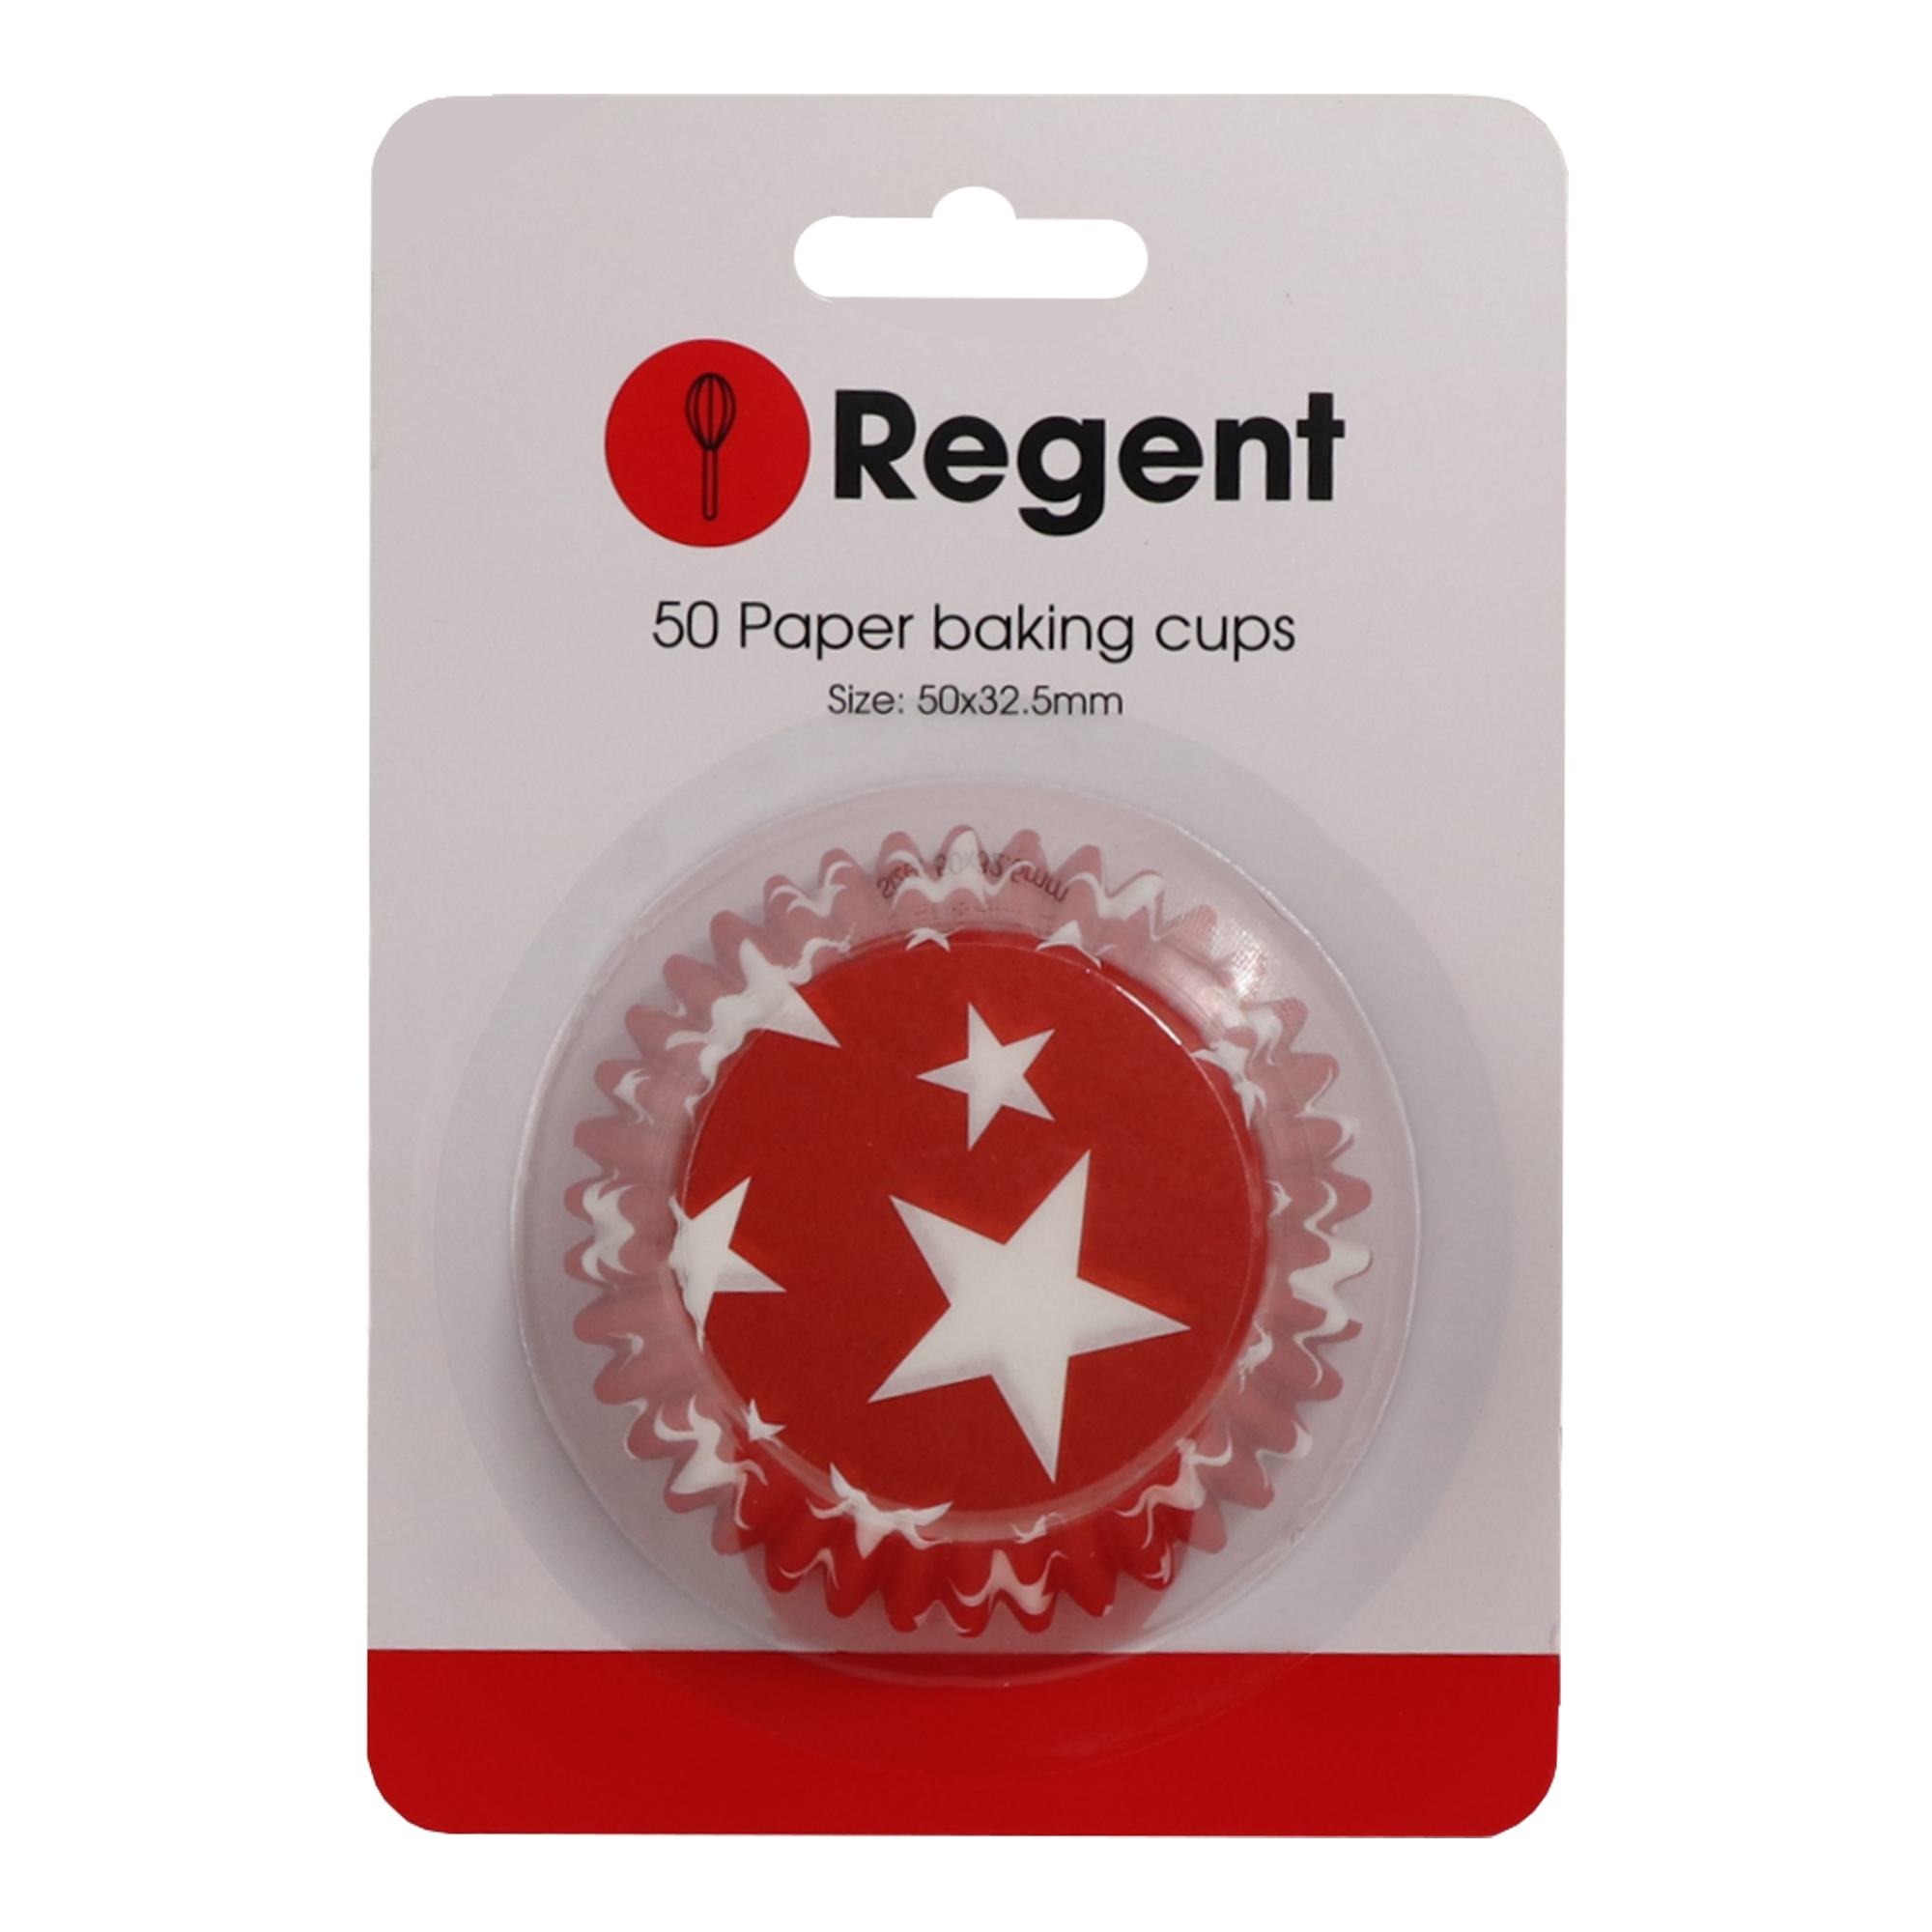 Regent Cake Cups Red & White Stars 50 Pieces